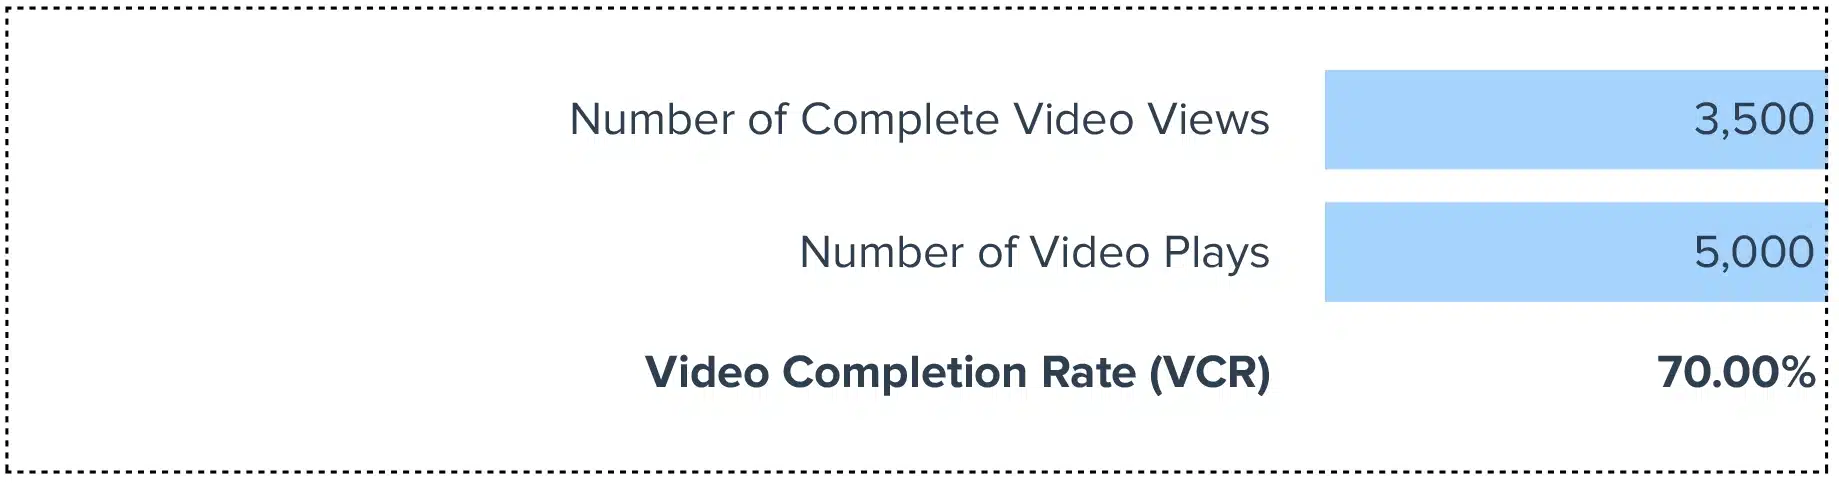 Video Completion Rate